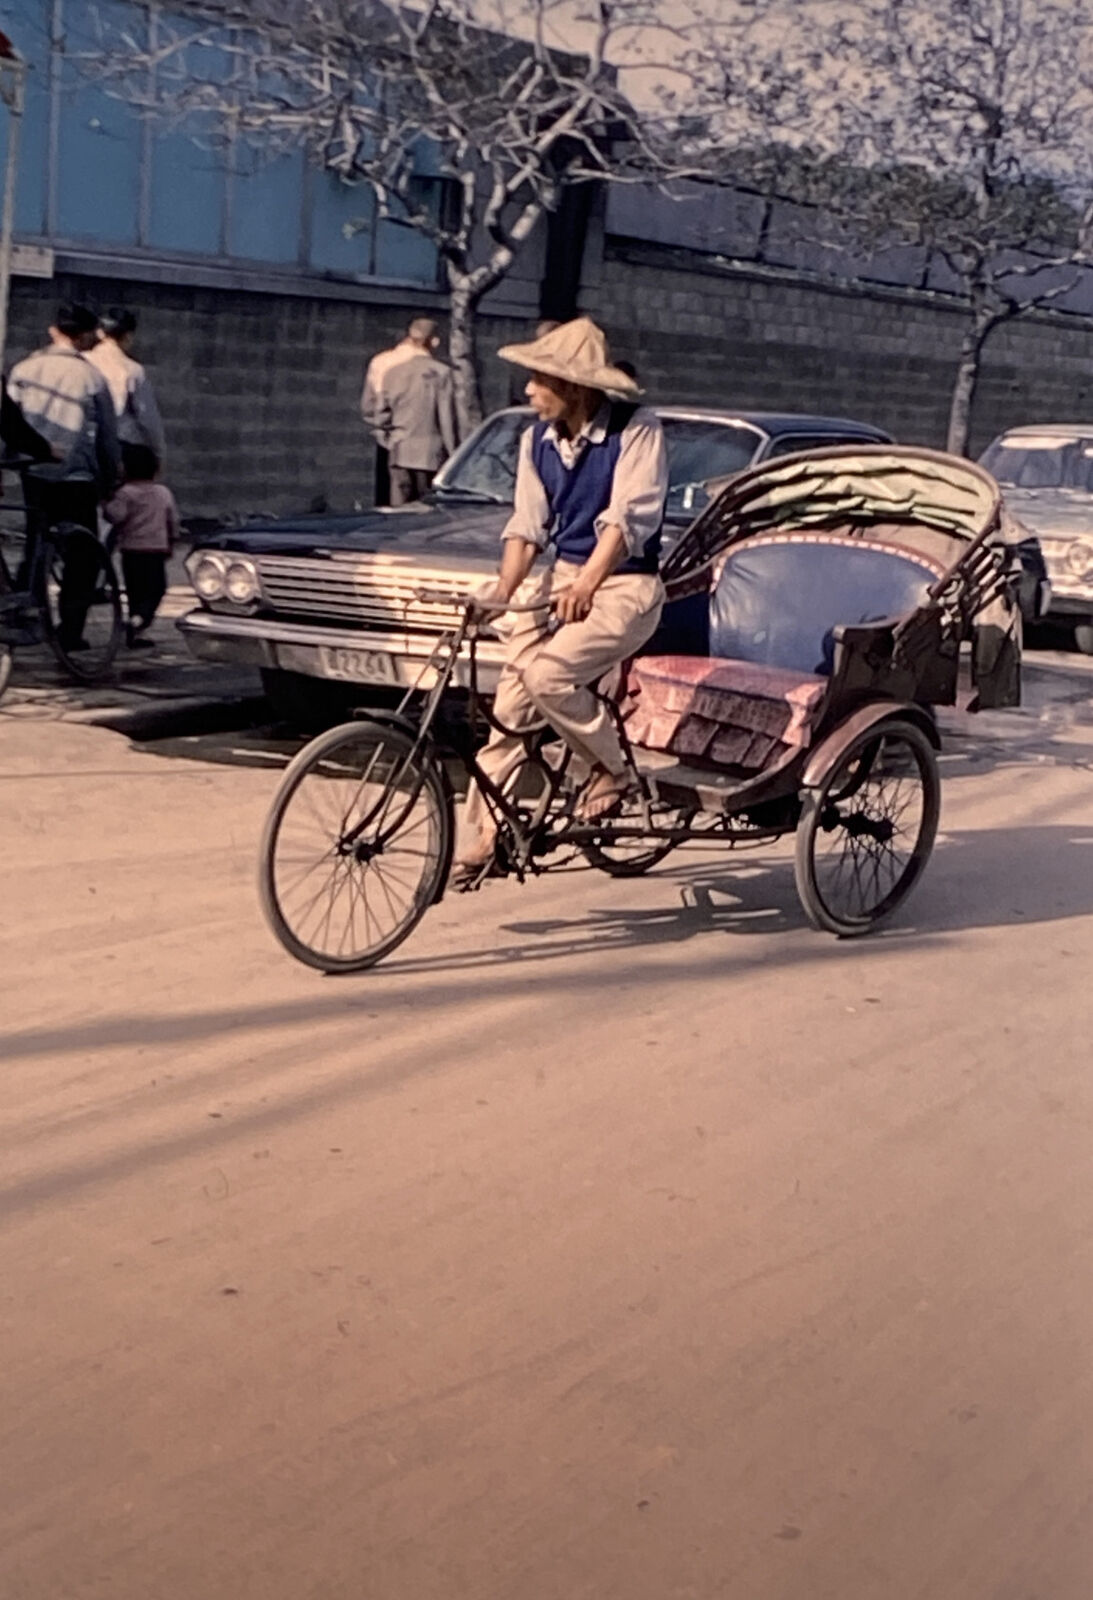 1965 Kodachrome Slides Lot of 5 China possibly Taiwan People Bicycle Buildings